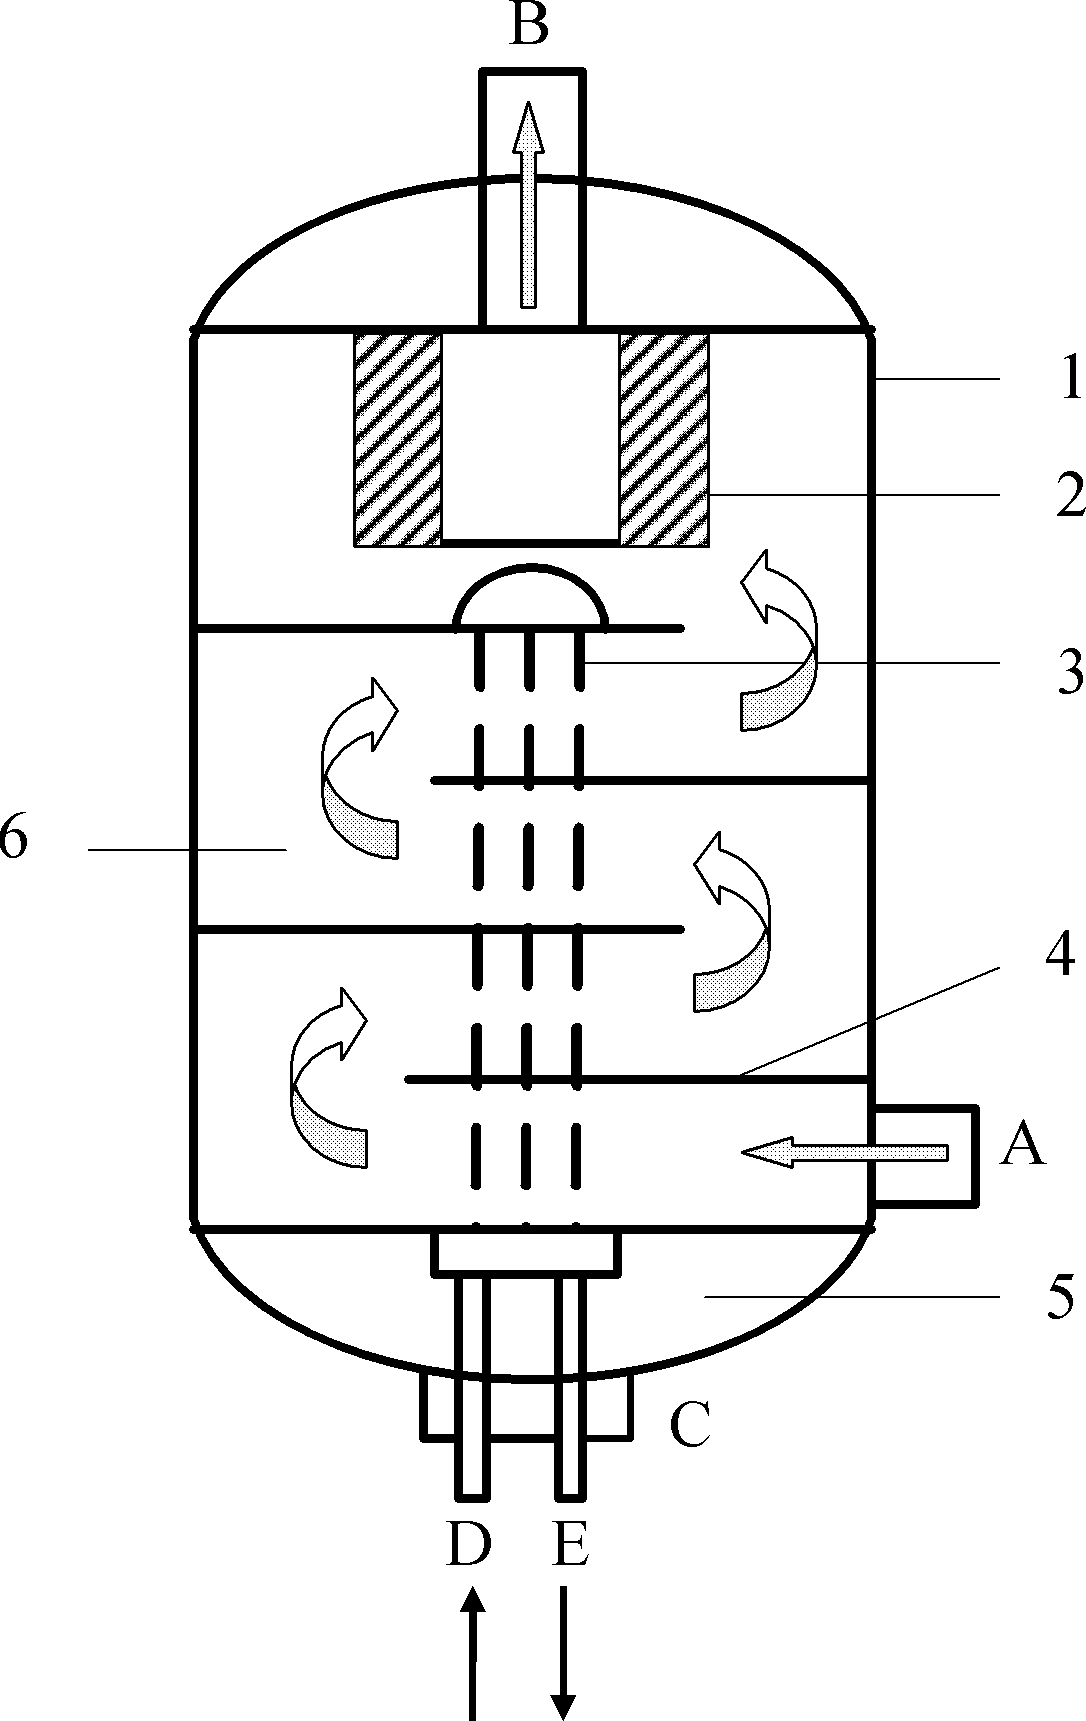 Condensing gathering separator for separating lubricating oil from refrigerant